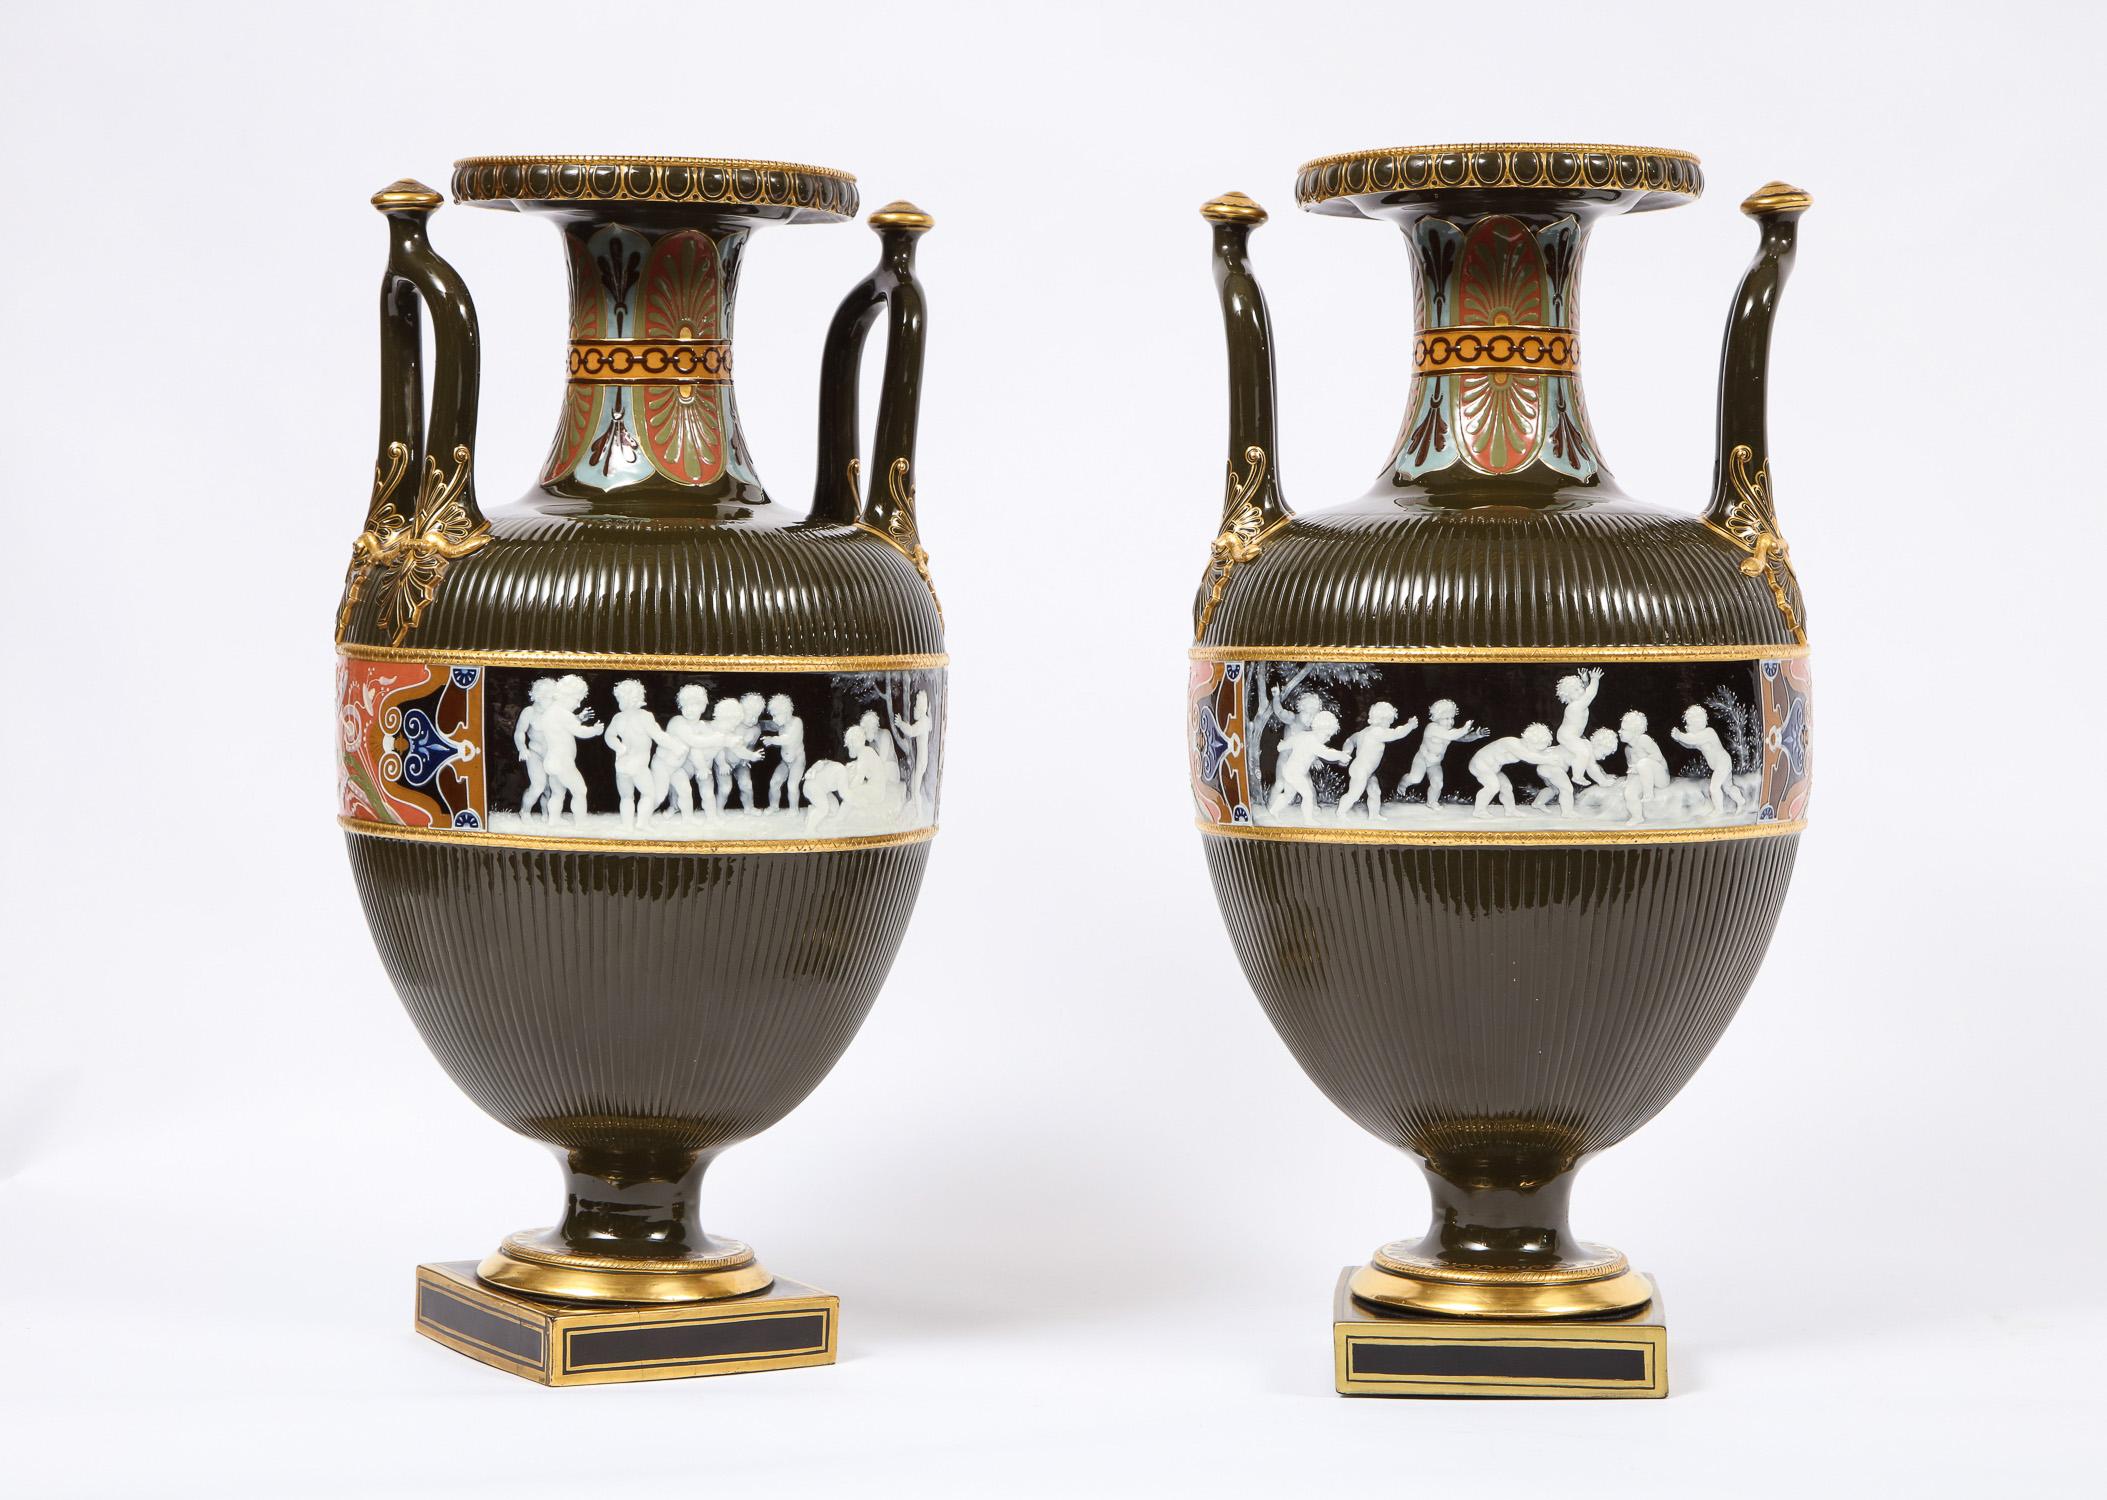 A magnificent and very large pair of antique Minton porcelain Pate Sur Pate vases with multi-paneled neoclassical scenes. In a gorgeous neoclassical style Amphora form with an olive green body, further adorned with beautiful multicolored red, blue